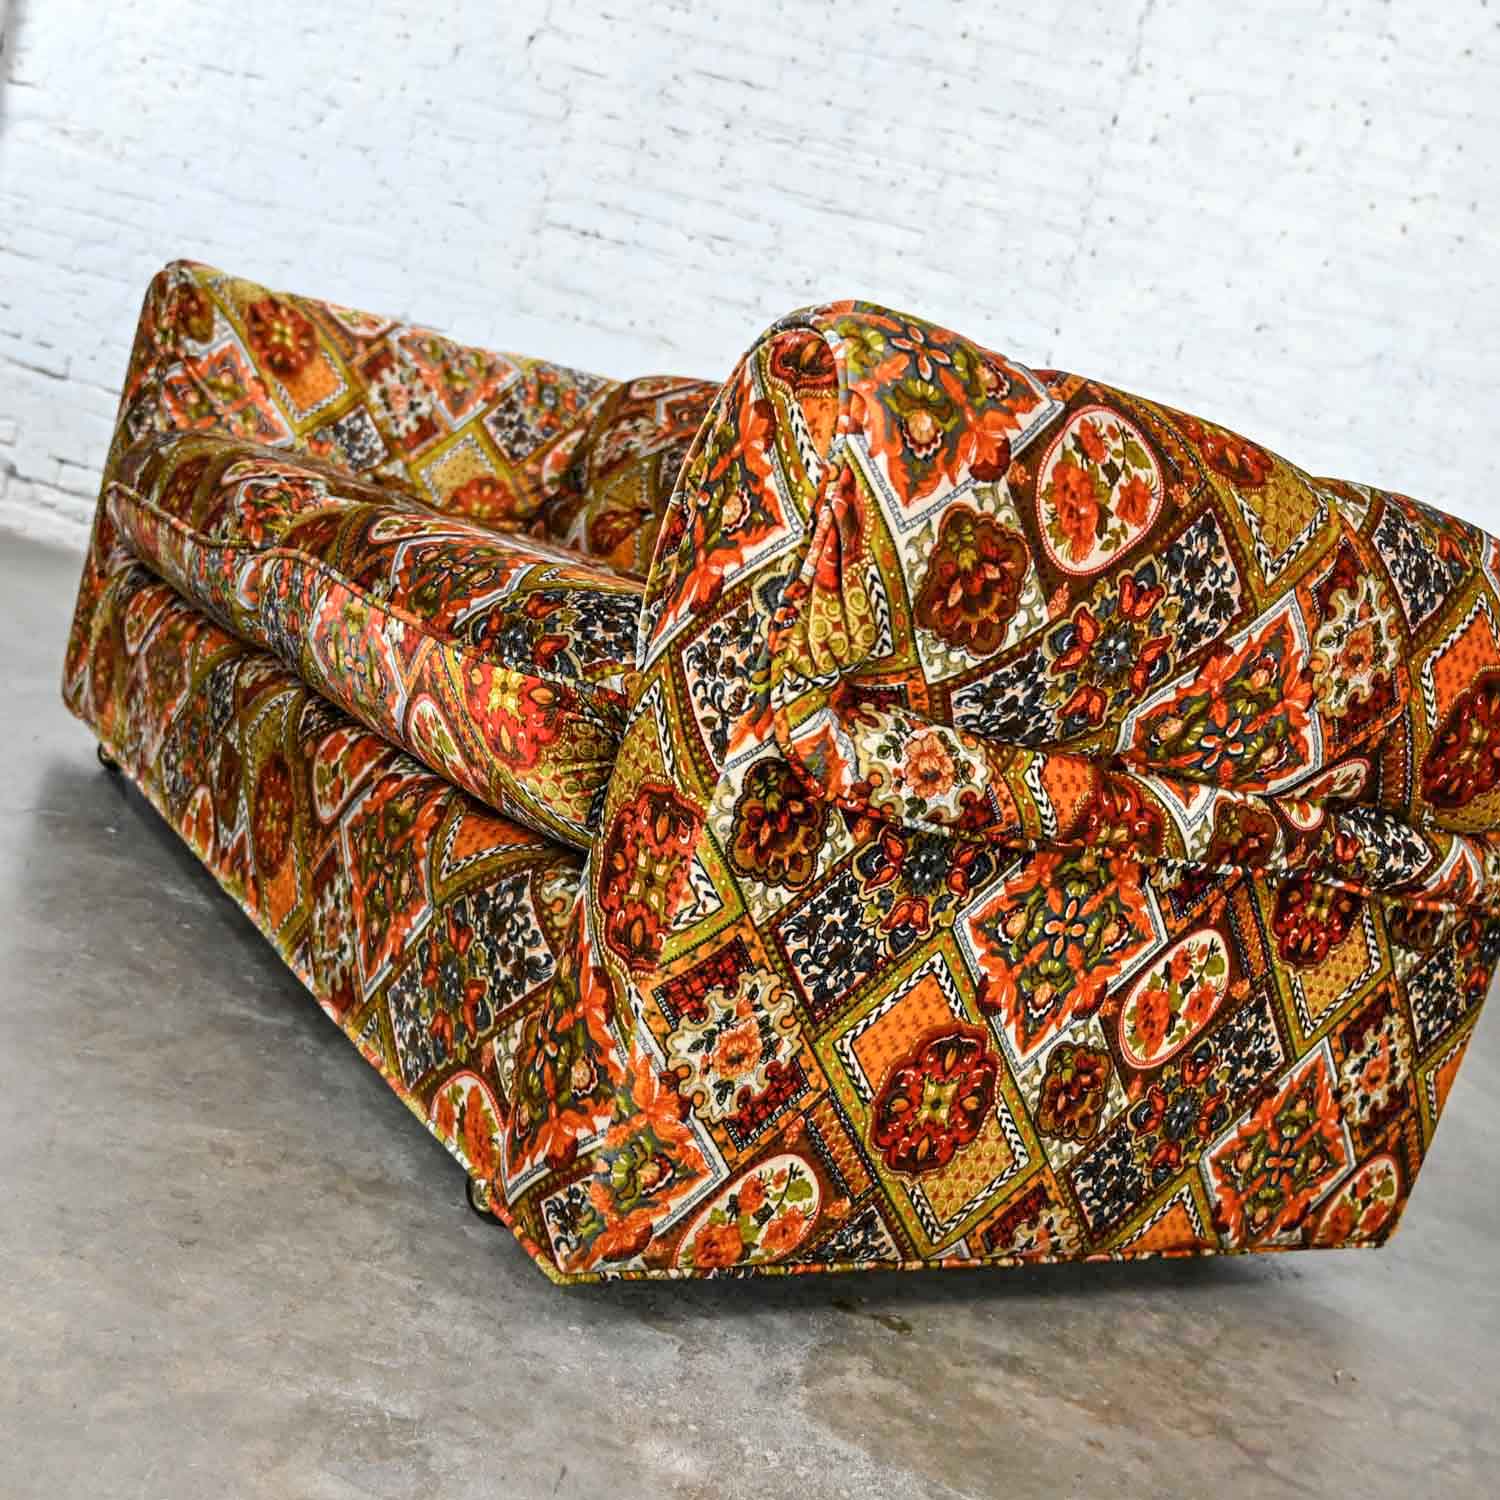 Vintage Modern Orange & Gold Geometrical Patterned Floral Patchwork Modern Tuxedo Style Love Seat by Maddox Furniture for J.C. Penney.